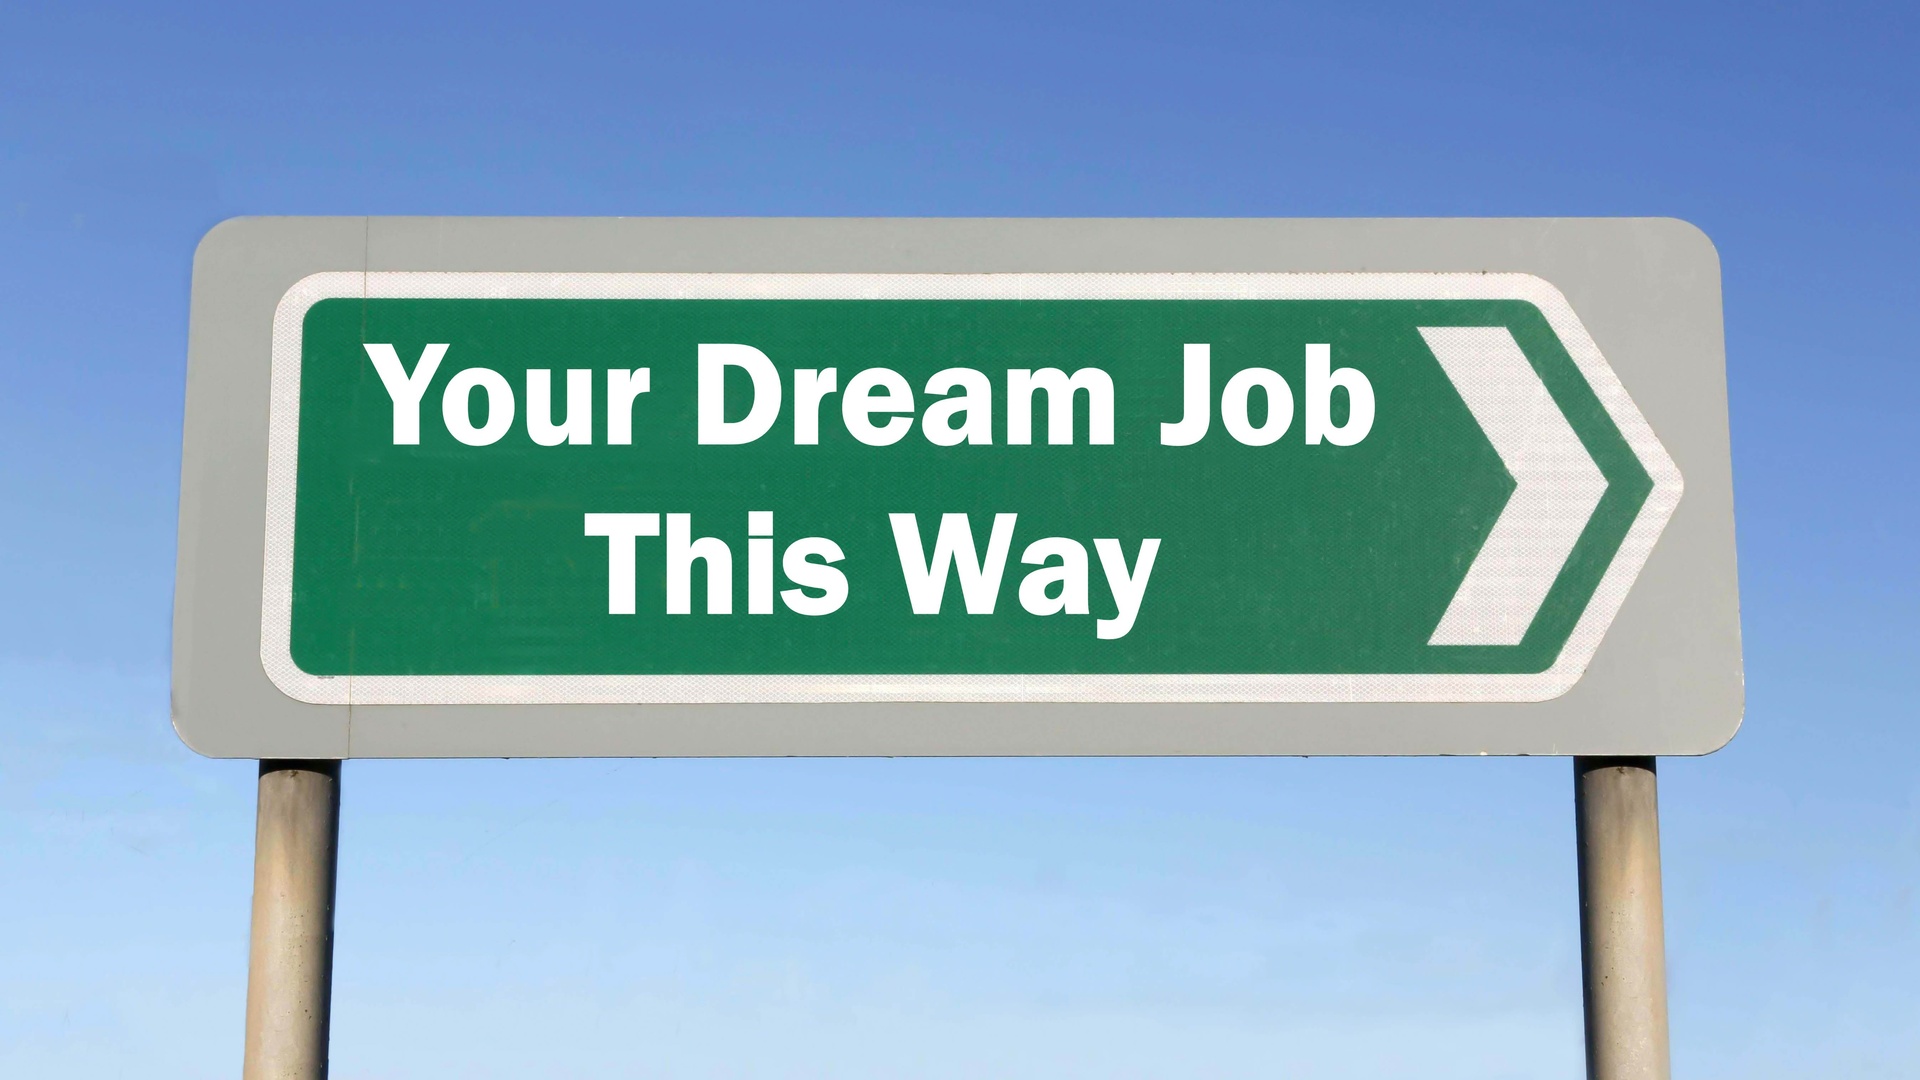 Now you know what to do as your dream job